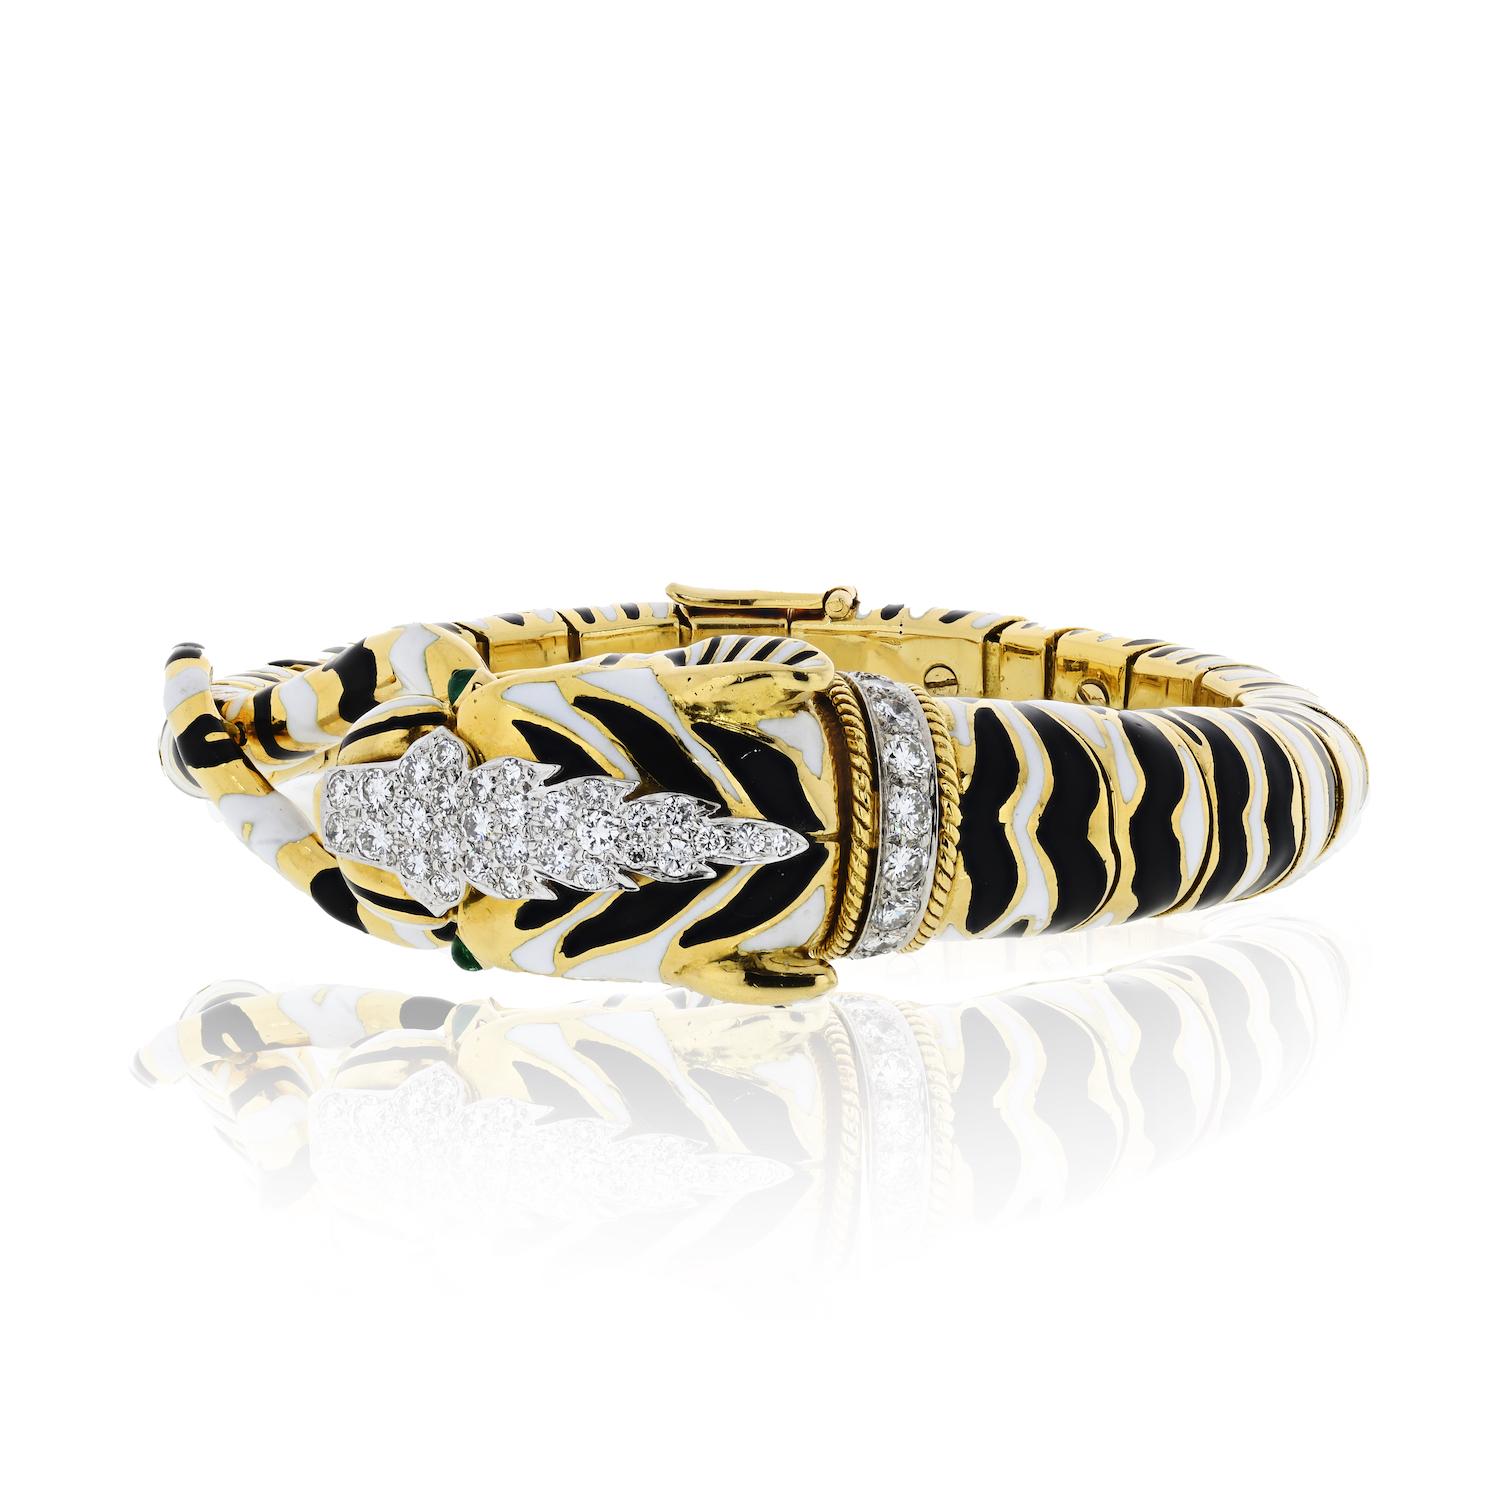 Fine and unusual diamond, emerald, platinum, and 18K yellow gold, bangle bracelet by David Webb. It resembles a tiger head, with cabochon emerald eyes and black enamel stripes, adorned with high-grade round brilliant cut diamonds set in platinum